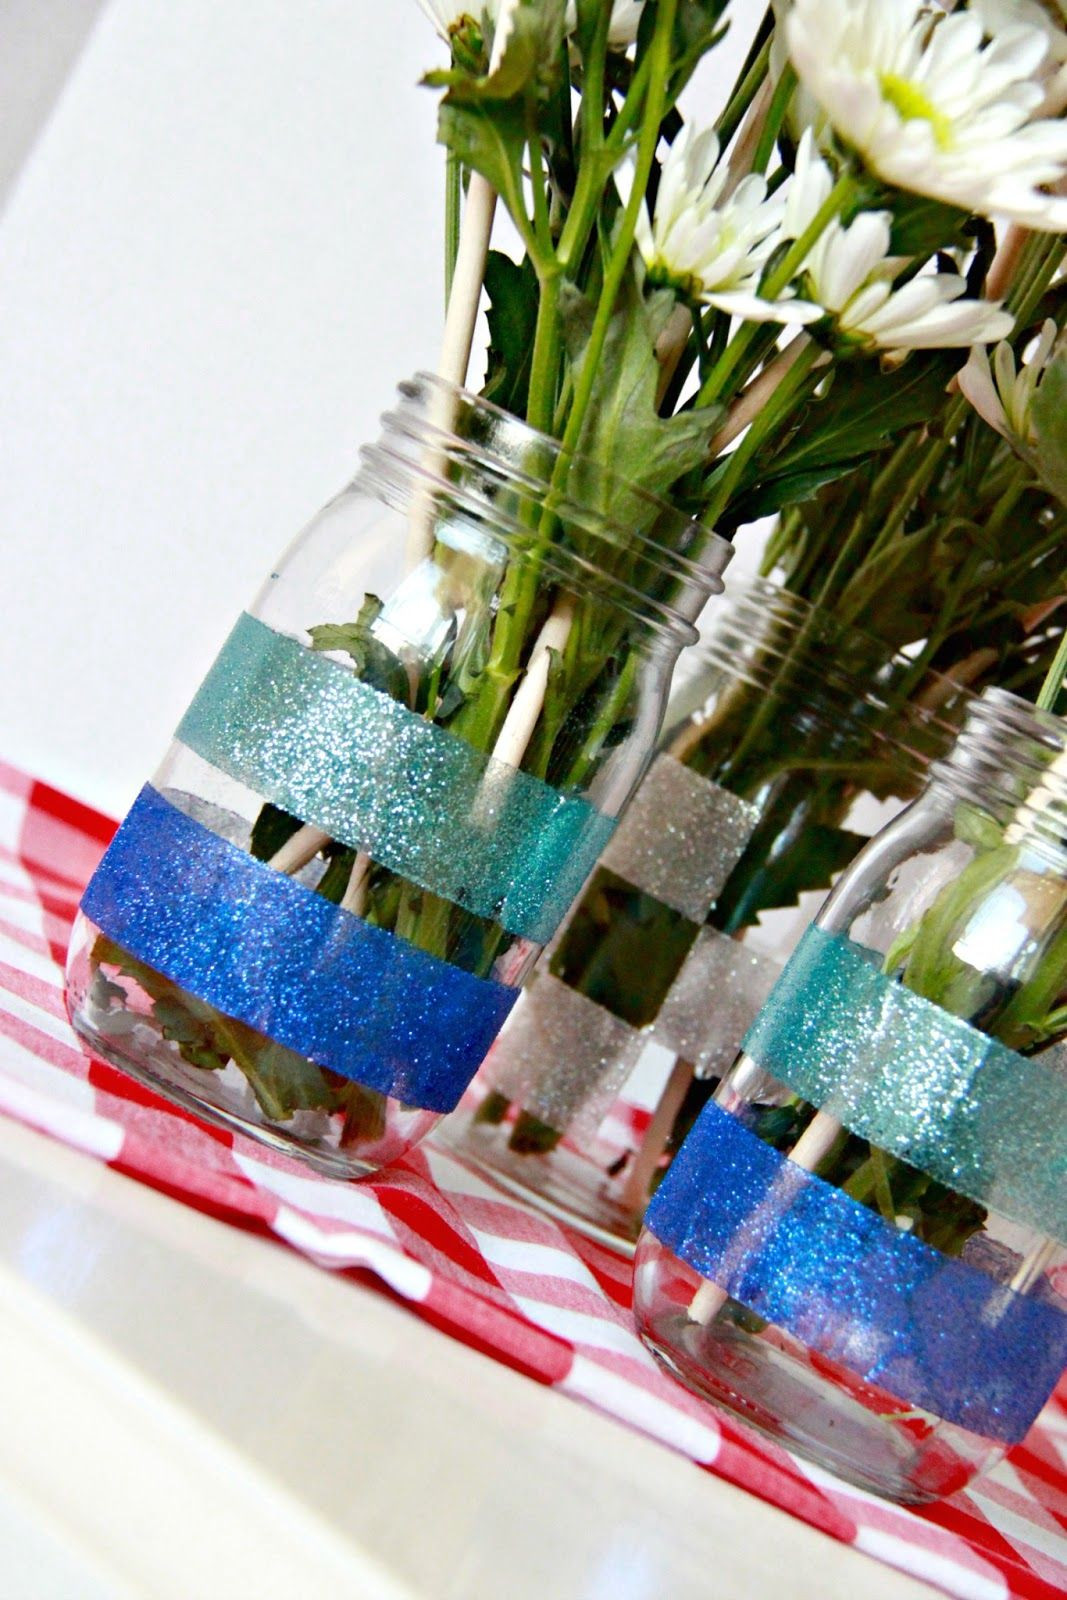 20 Nice Mason Jar Vases with Ribbon 2022 free download mason jar vases with ribbon of list of pinterest sorority crafts mason jar center pieces images for just another day in paradise glitter mason jar vases patriotic center pieces